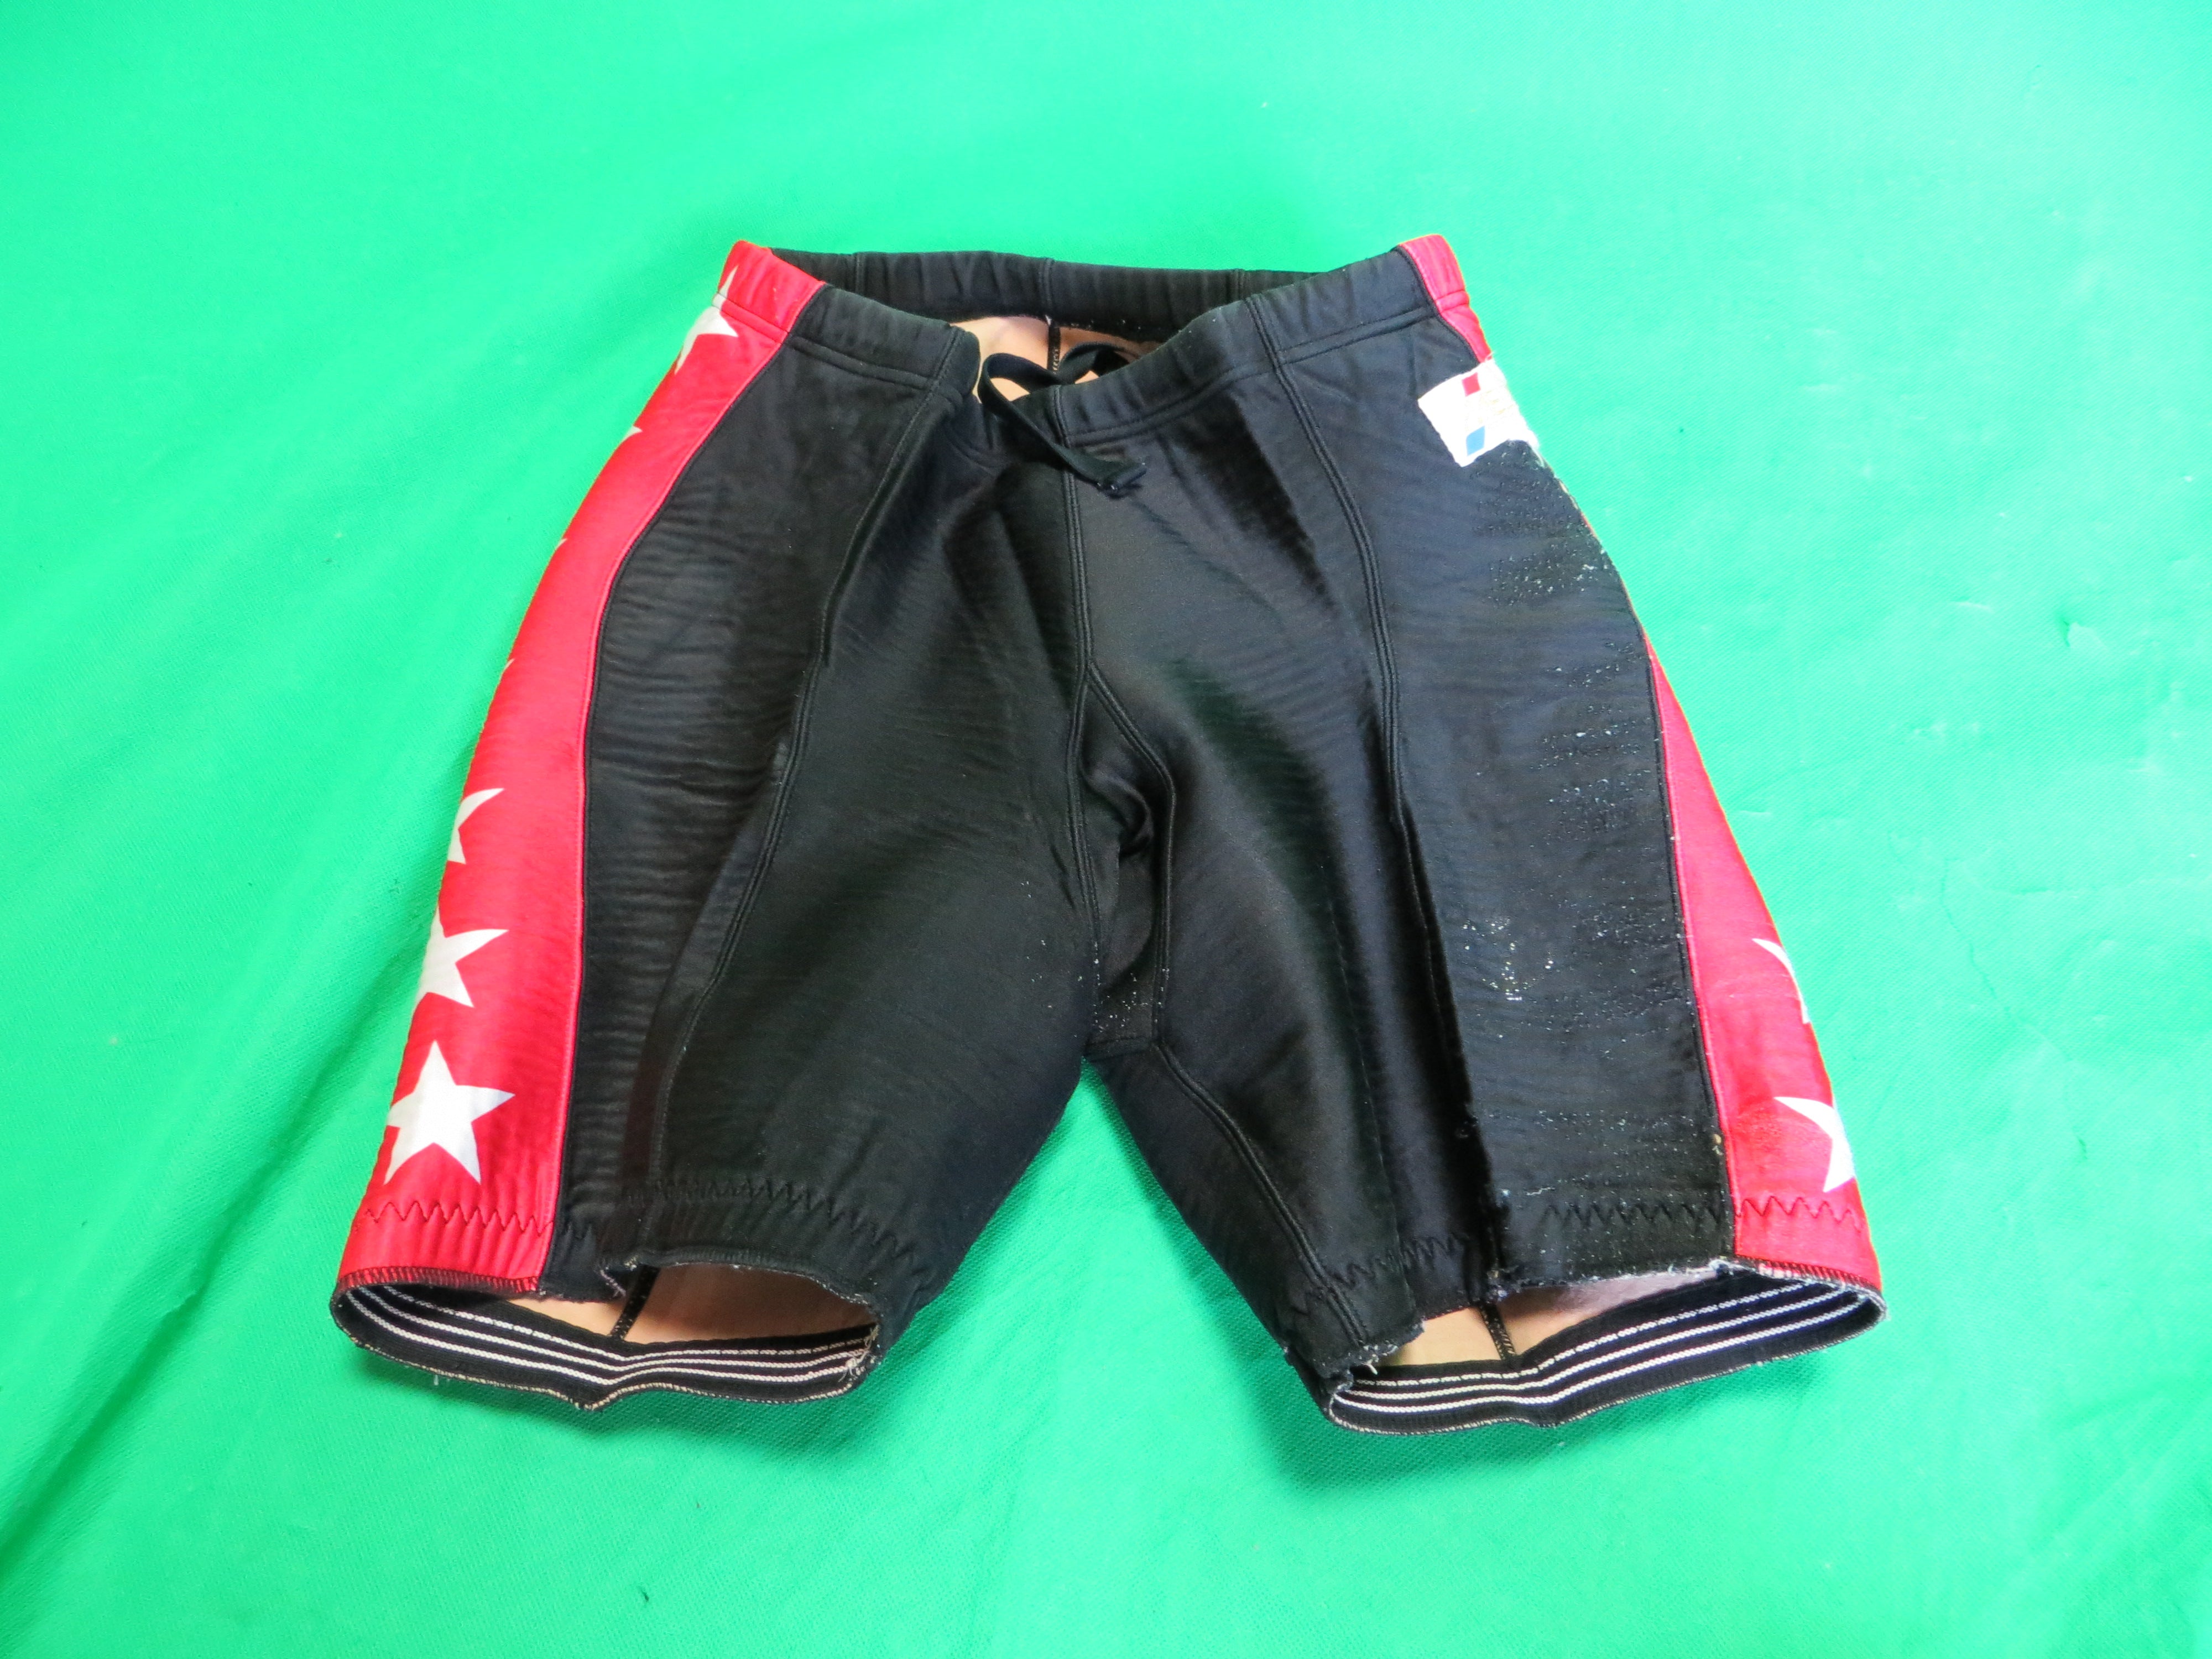 Medalist Club Authentic Keirin Shorts Japanese L Size #4 (American M)